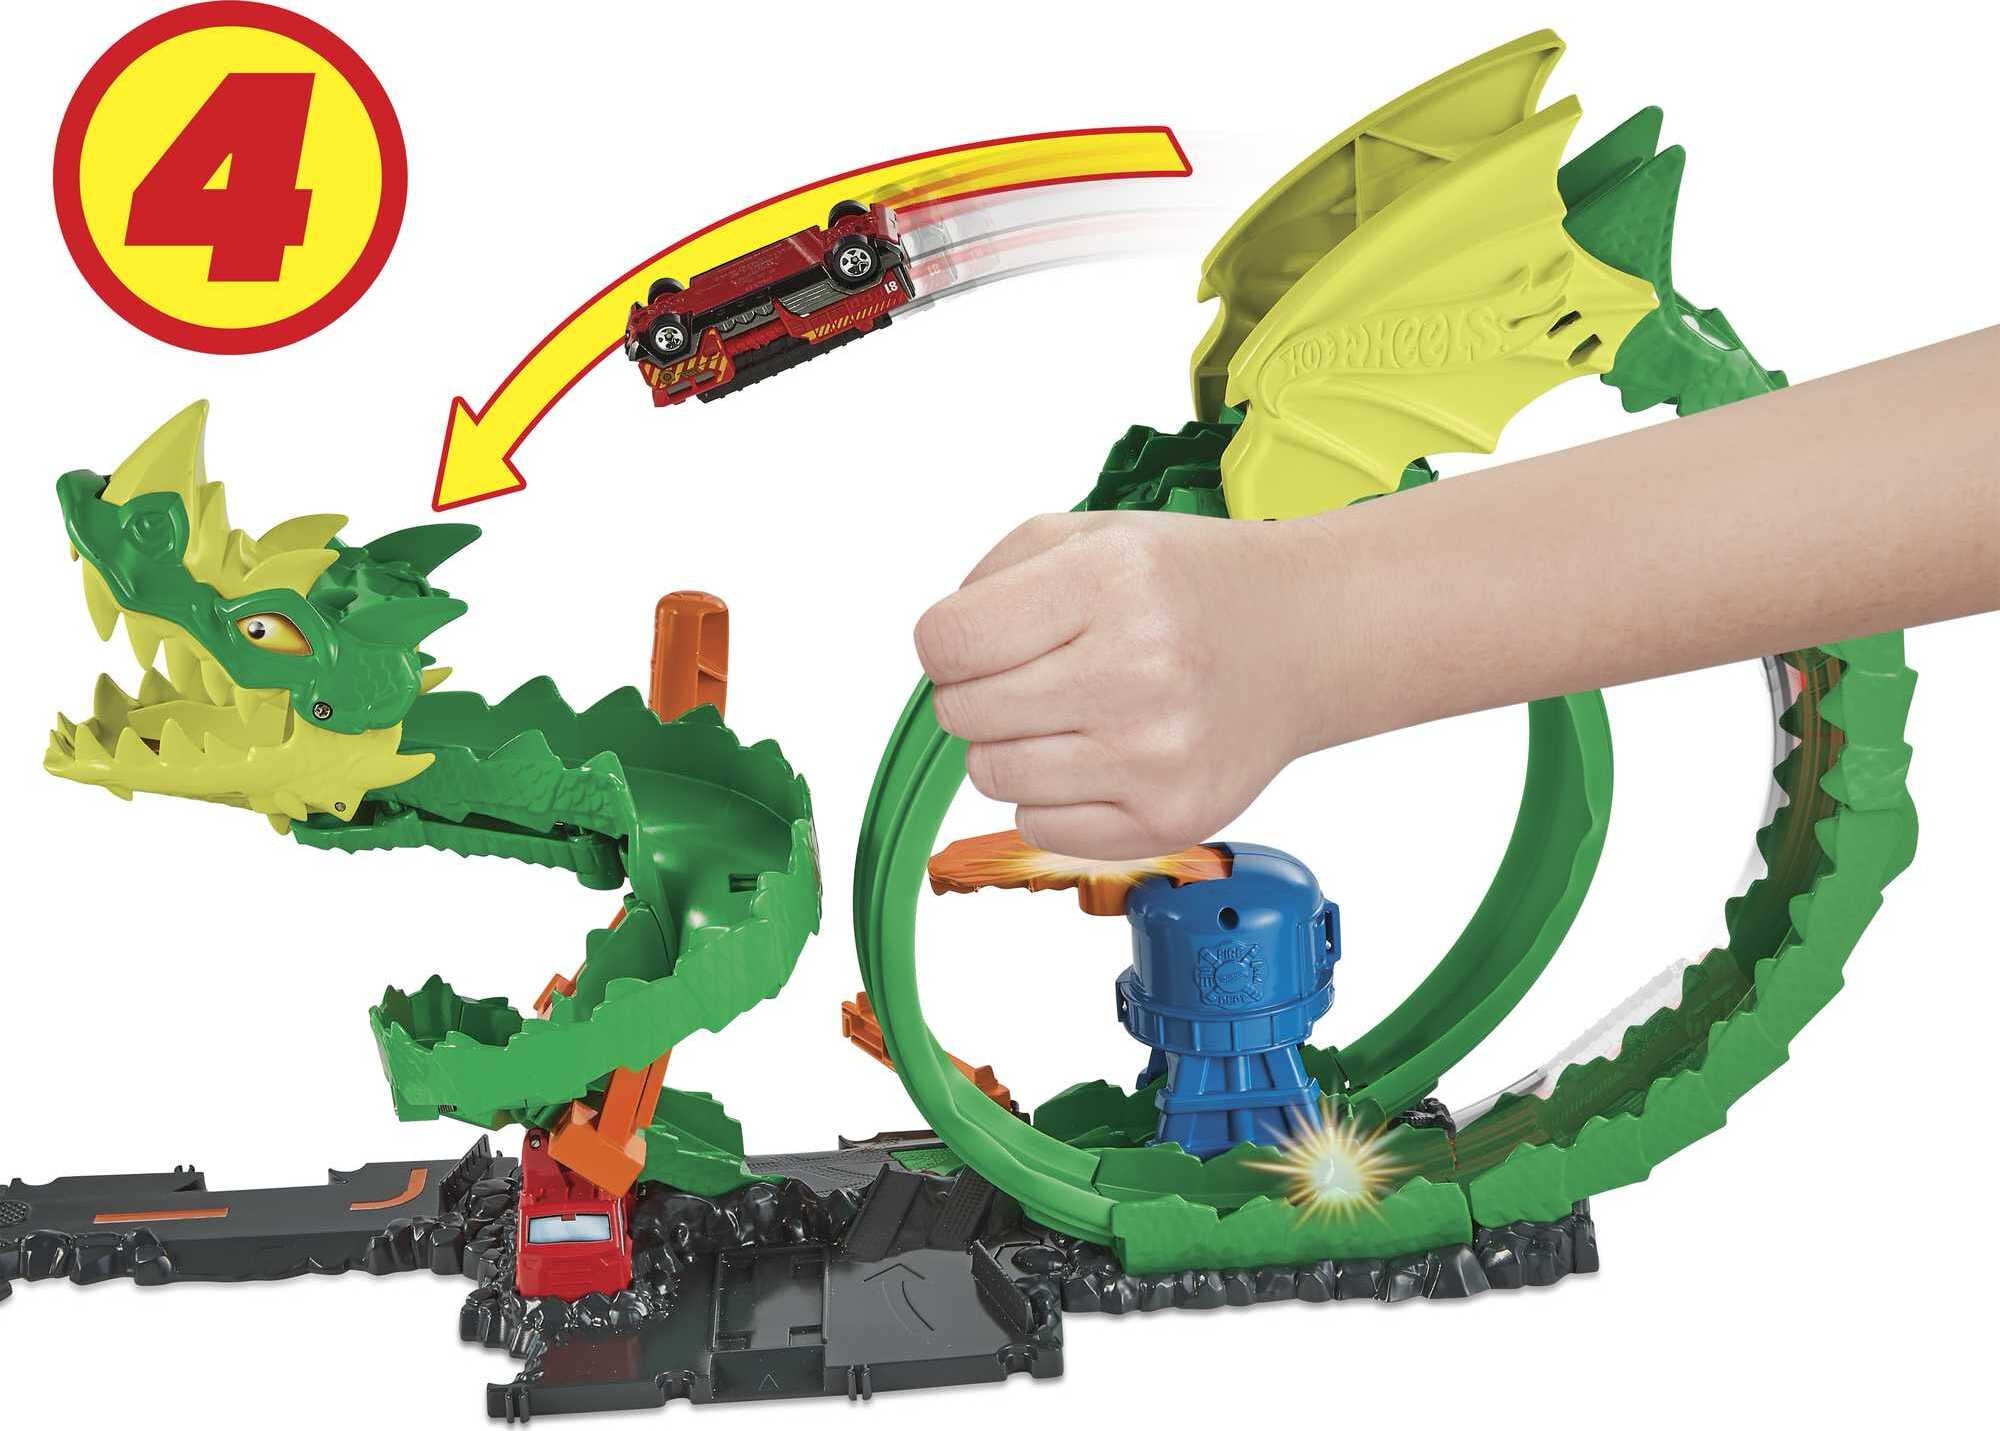  HOT WHEELS Track Set with 1:64 Scale Toy Firetruck, City Fire  Station with Dragon Nemesis and Track Play, Dragon Drive Firefight : Toys &  Games